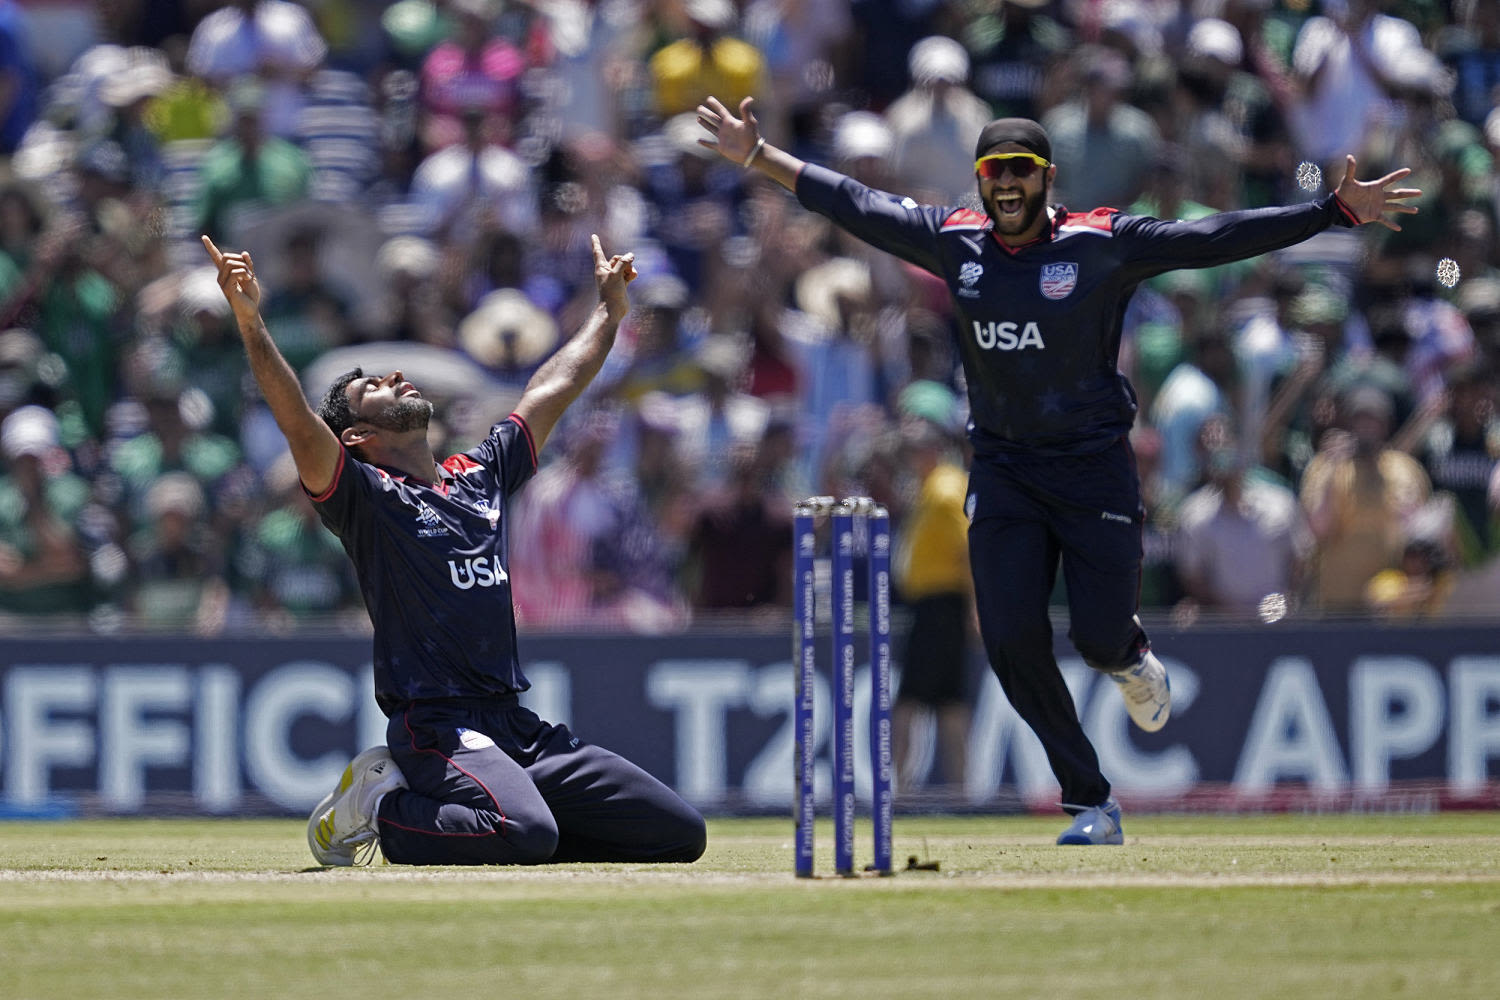 The ultimate embarrassment for a cricket powerhouse: Losing to Team U.S.A.